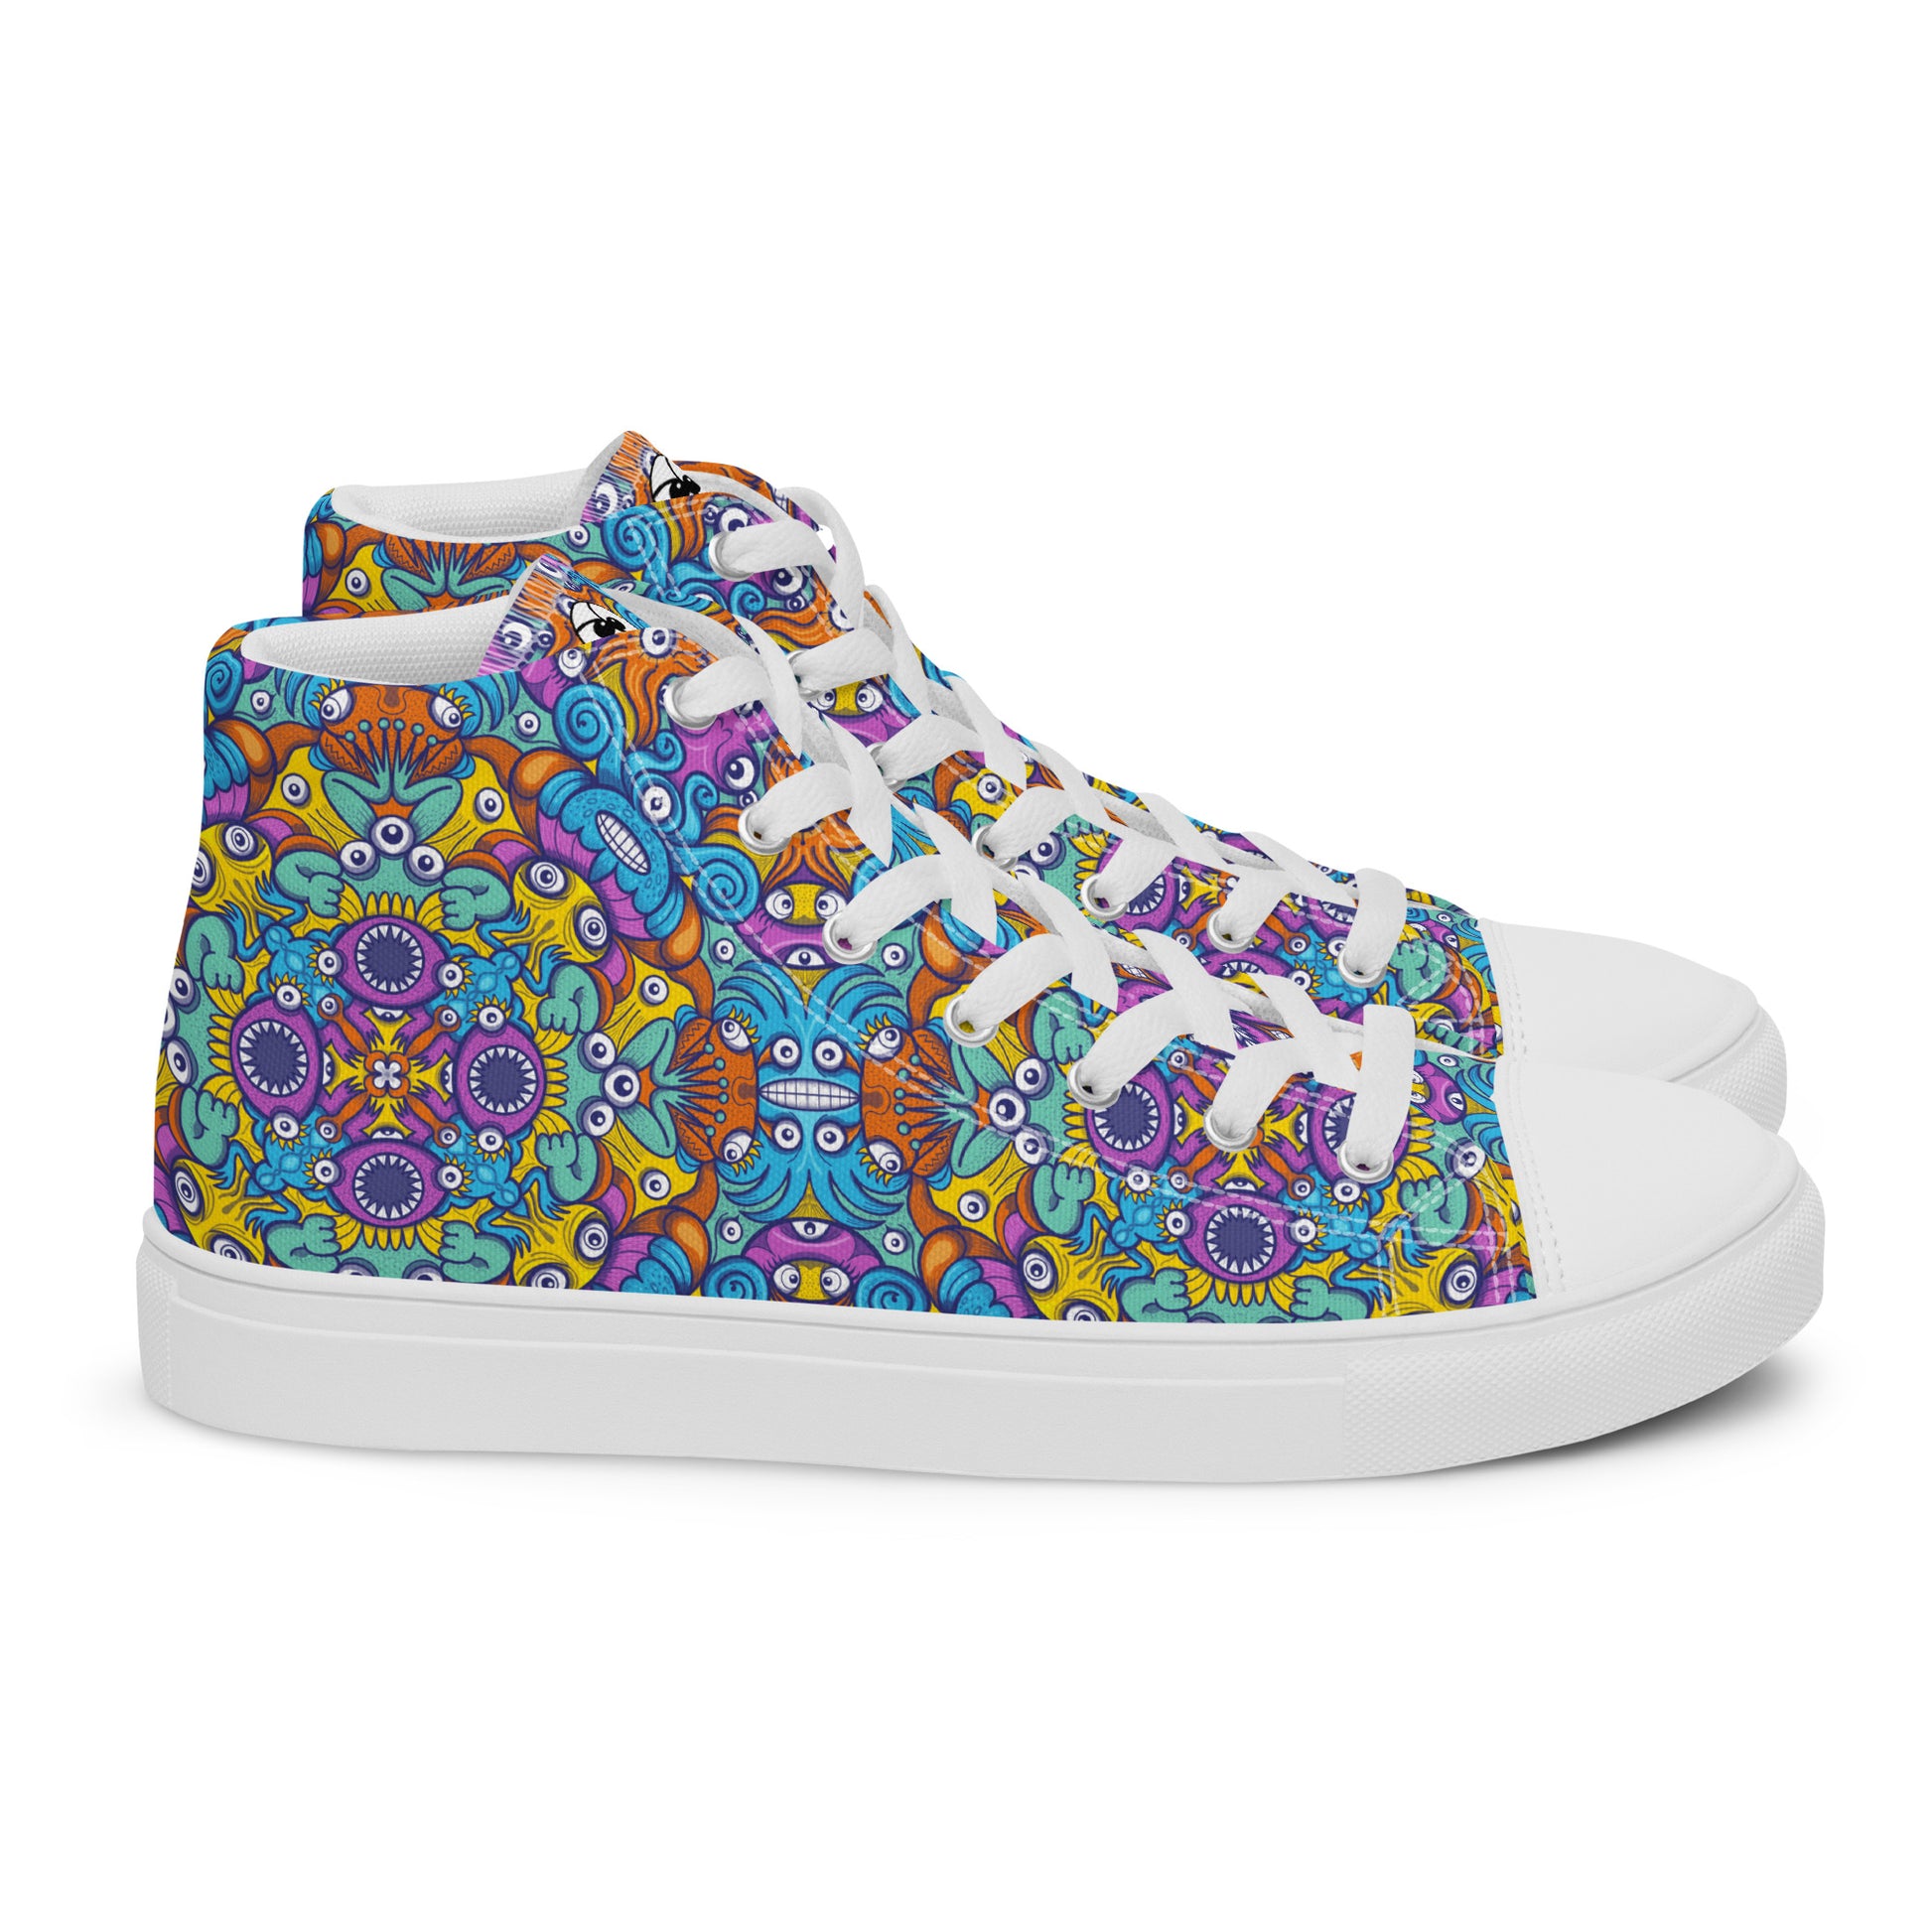 The ultimate sea beasts cast from the deep end of the ocean - Women’s high top canvas shoes. Side view